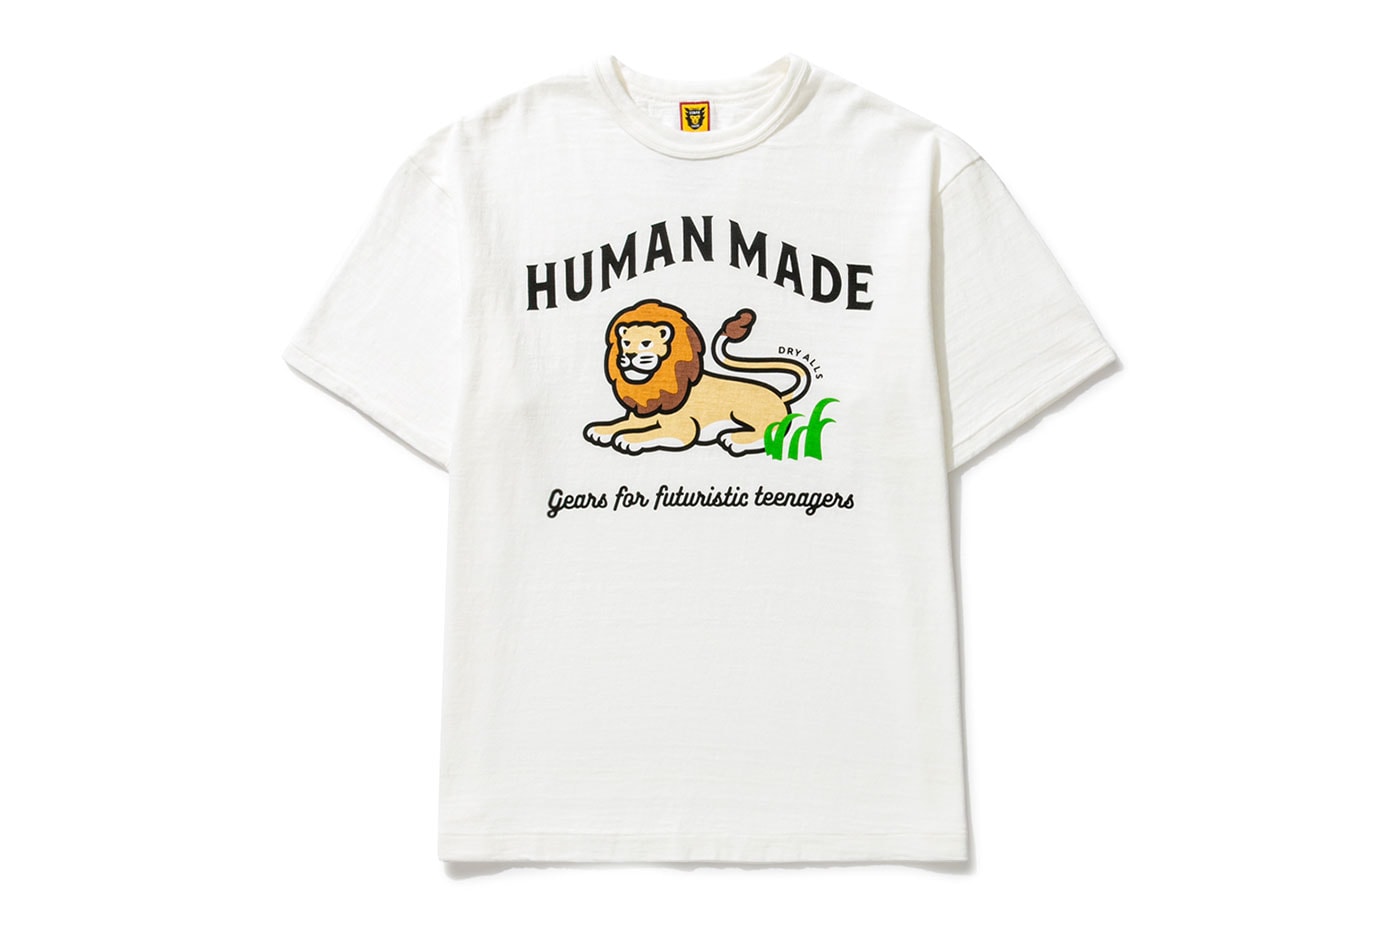 HUMAN MADE is a benchmark in the streetwear universe